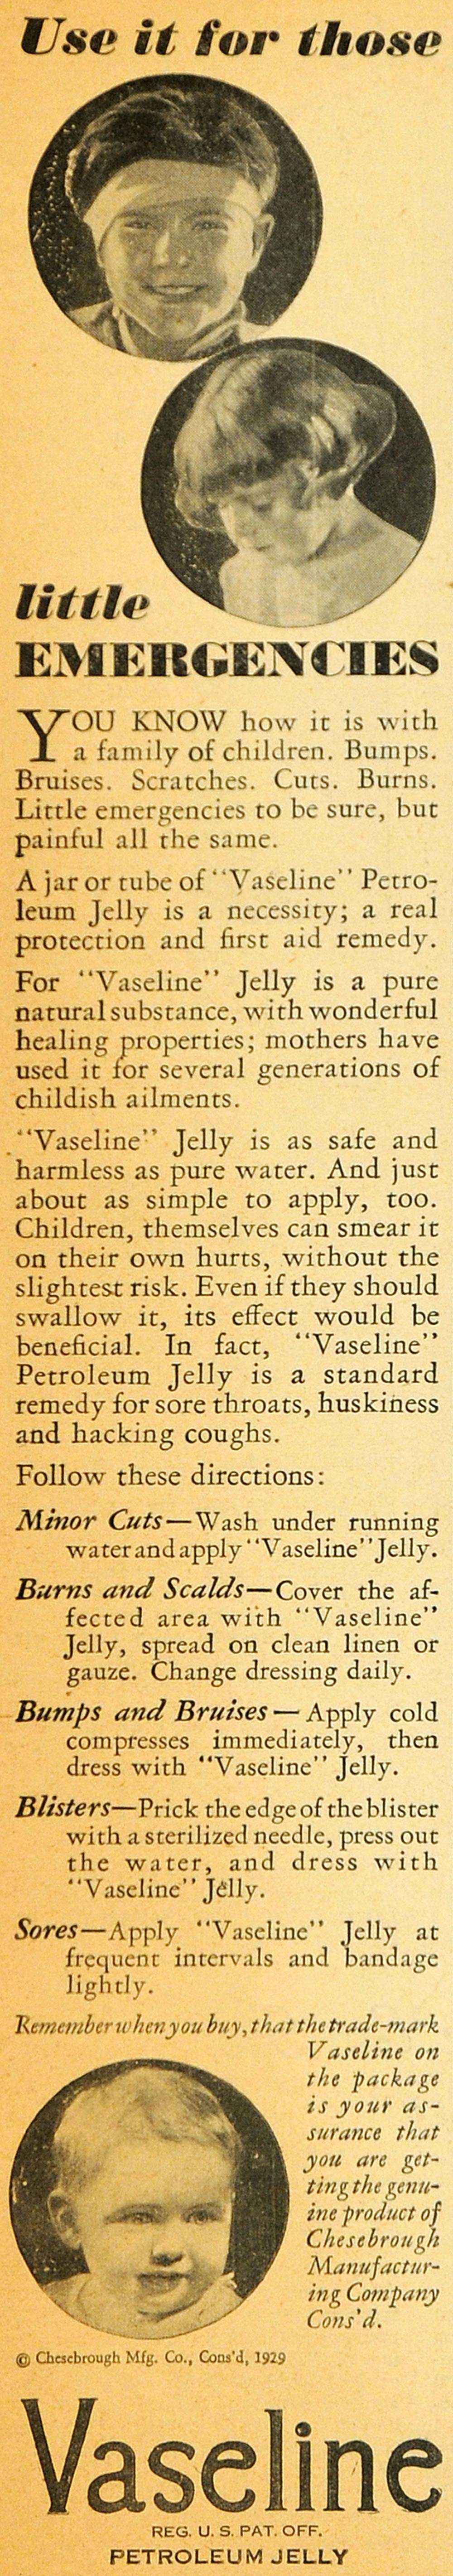 1929 Ad Vaseline Petroleum Jelly Kids First Aid Uses - ORIGINAL ADVERTISING HOH1